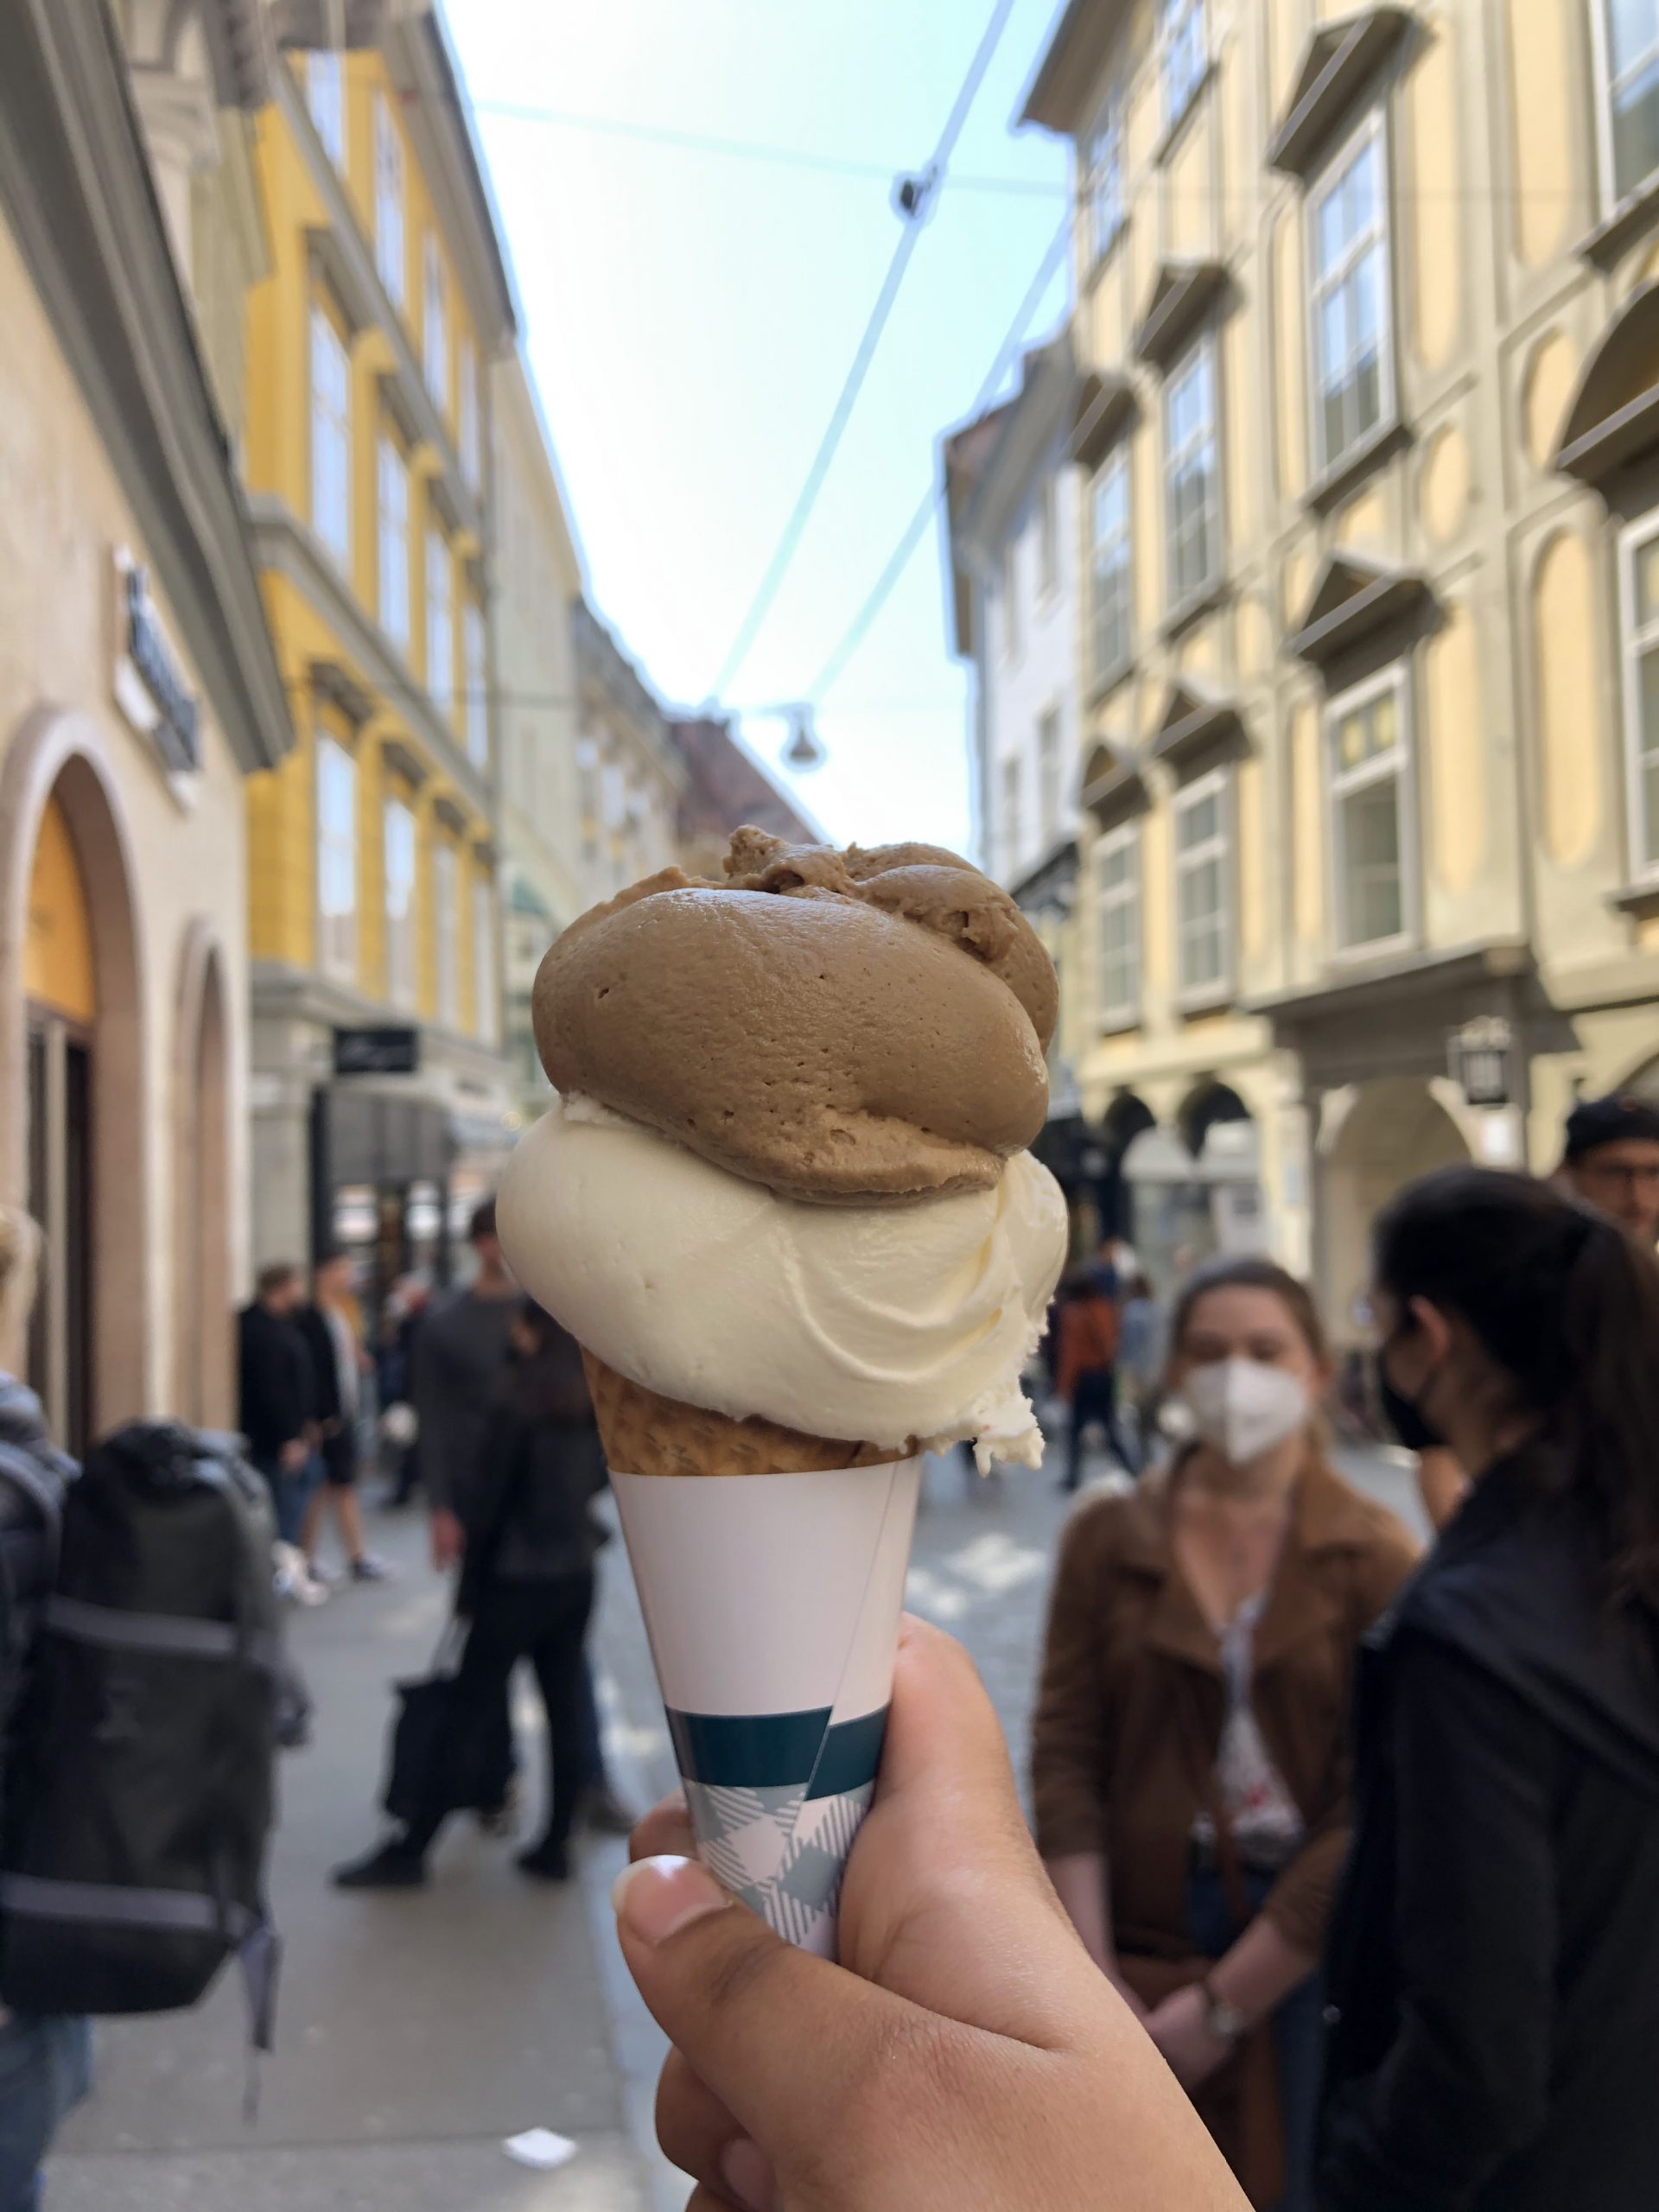 hand holding paper wrapped cone with gelato against backdrop of city street with people walking during daytime